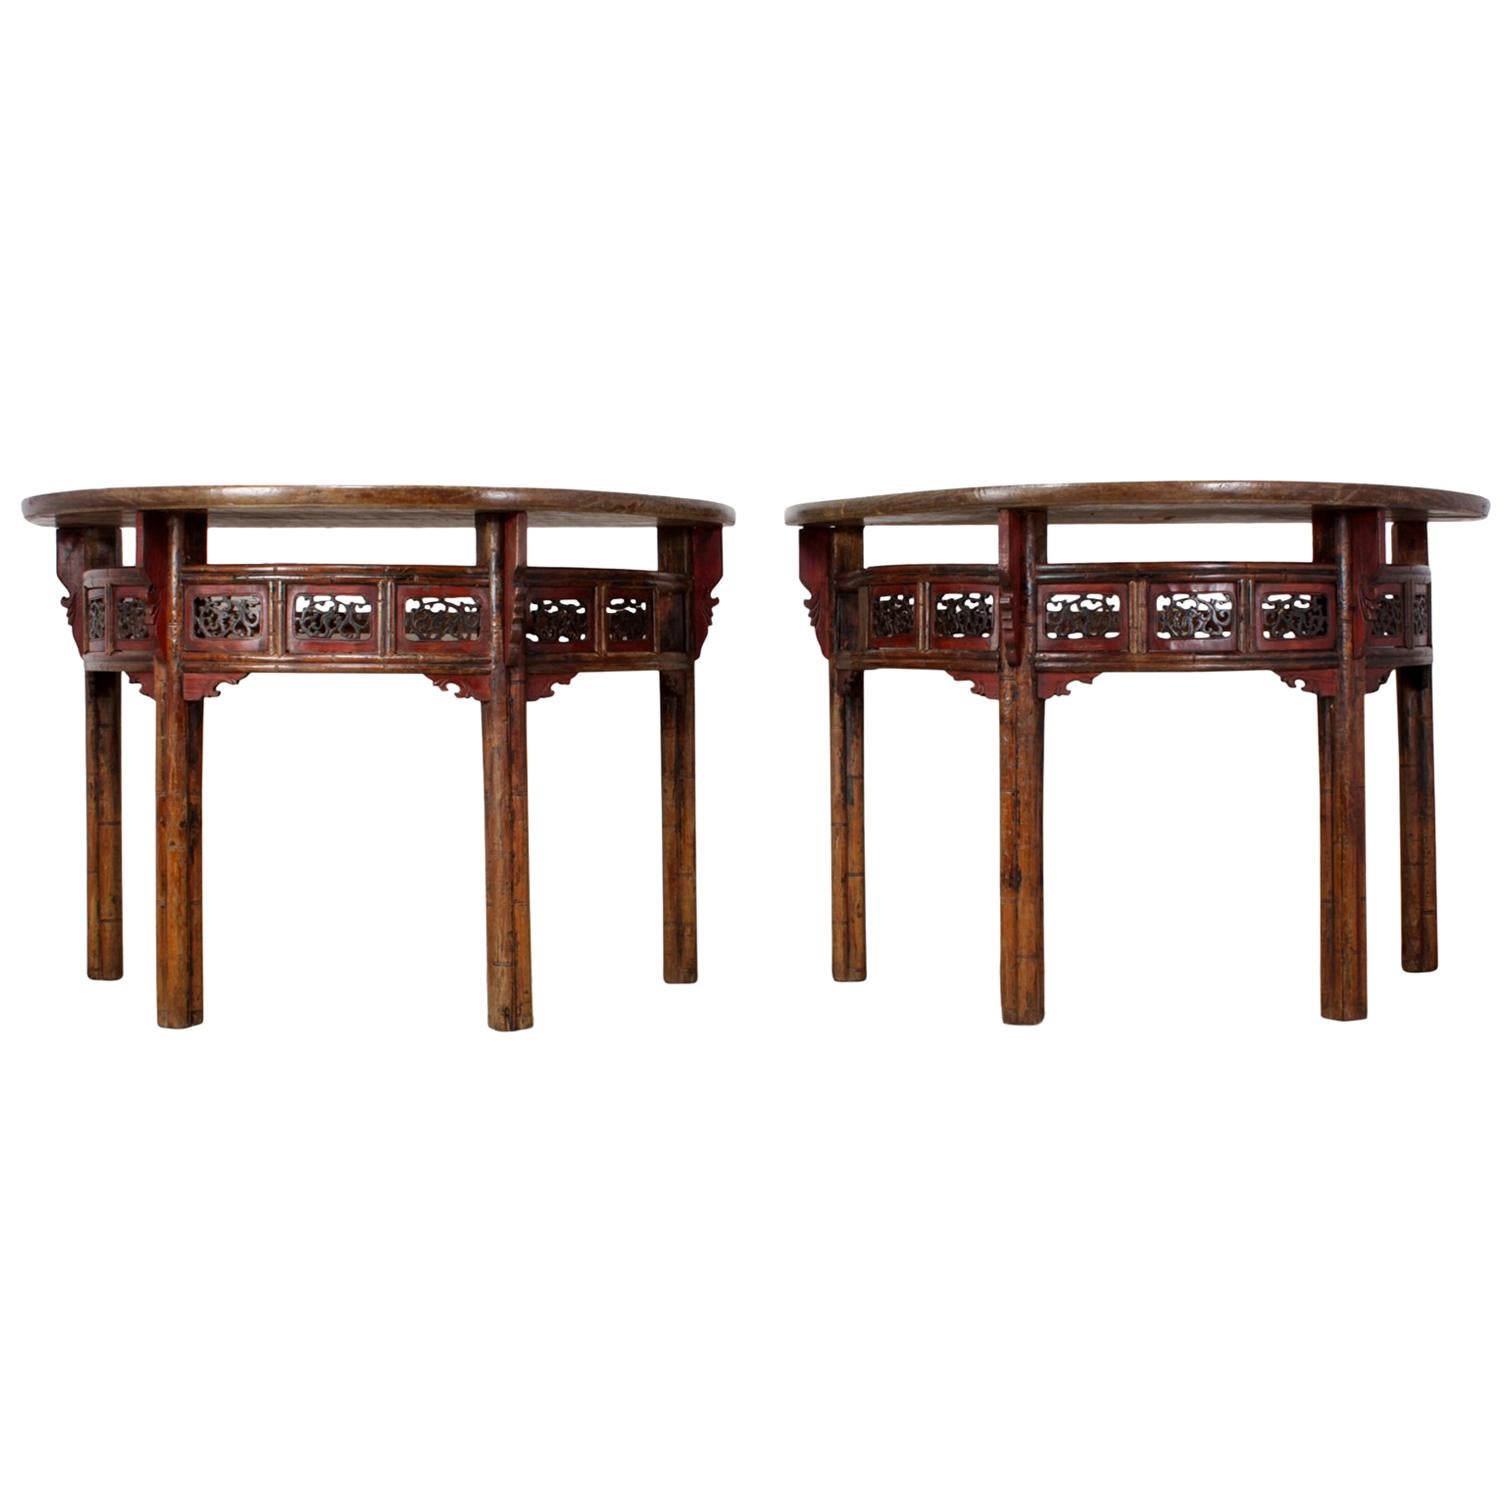 Pair of Chinese Half Moon Console Tables, circa 1860 For Sale